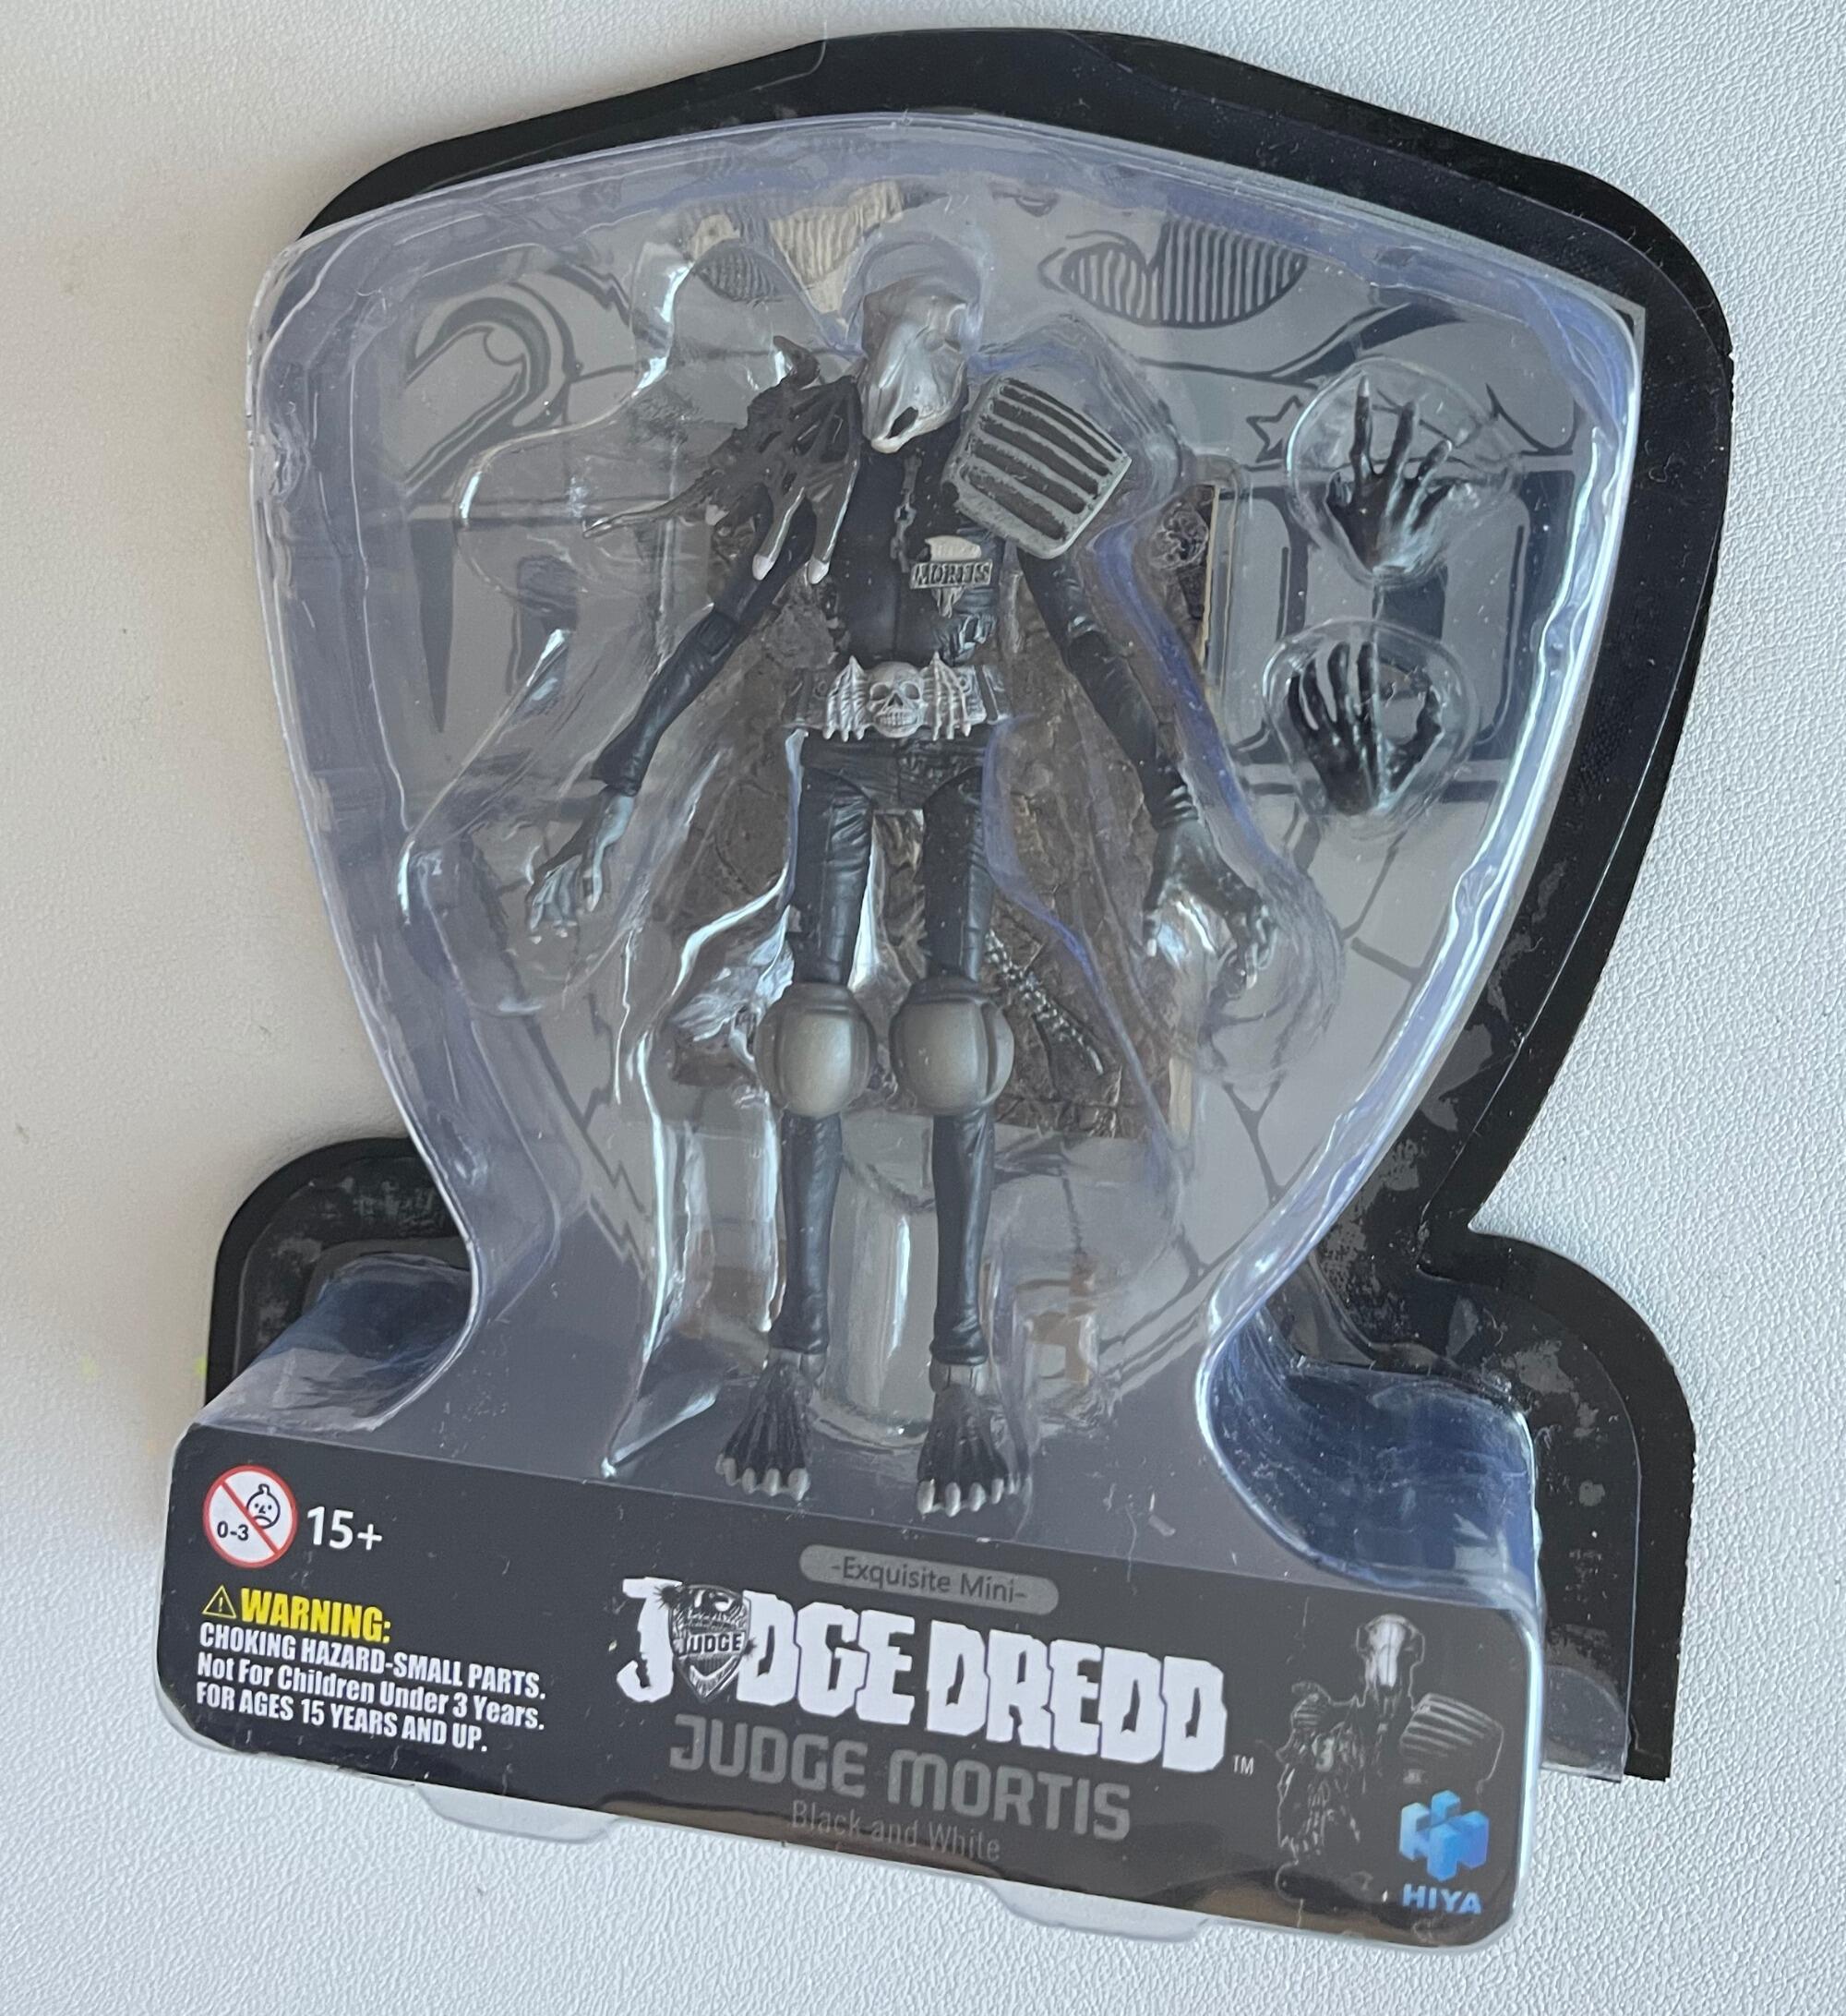 Judge Mortis 1:18 scale black and white action figure from Judge Dredd, made by Hiya